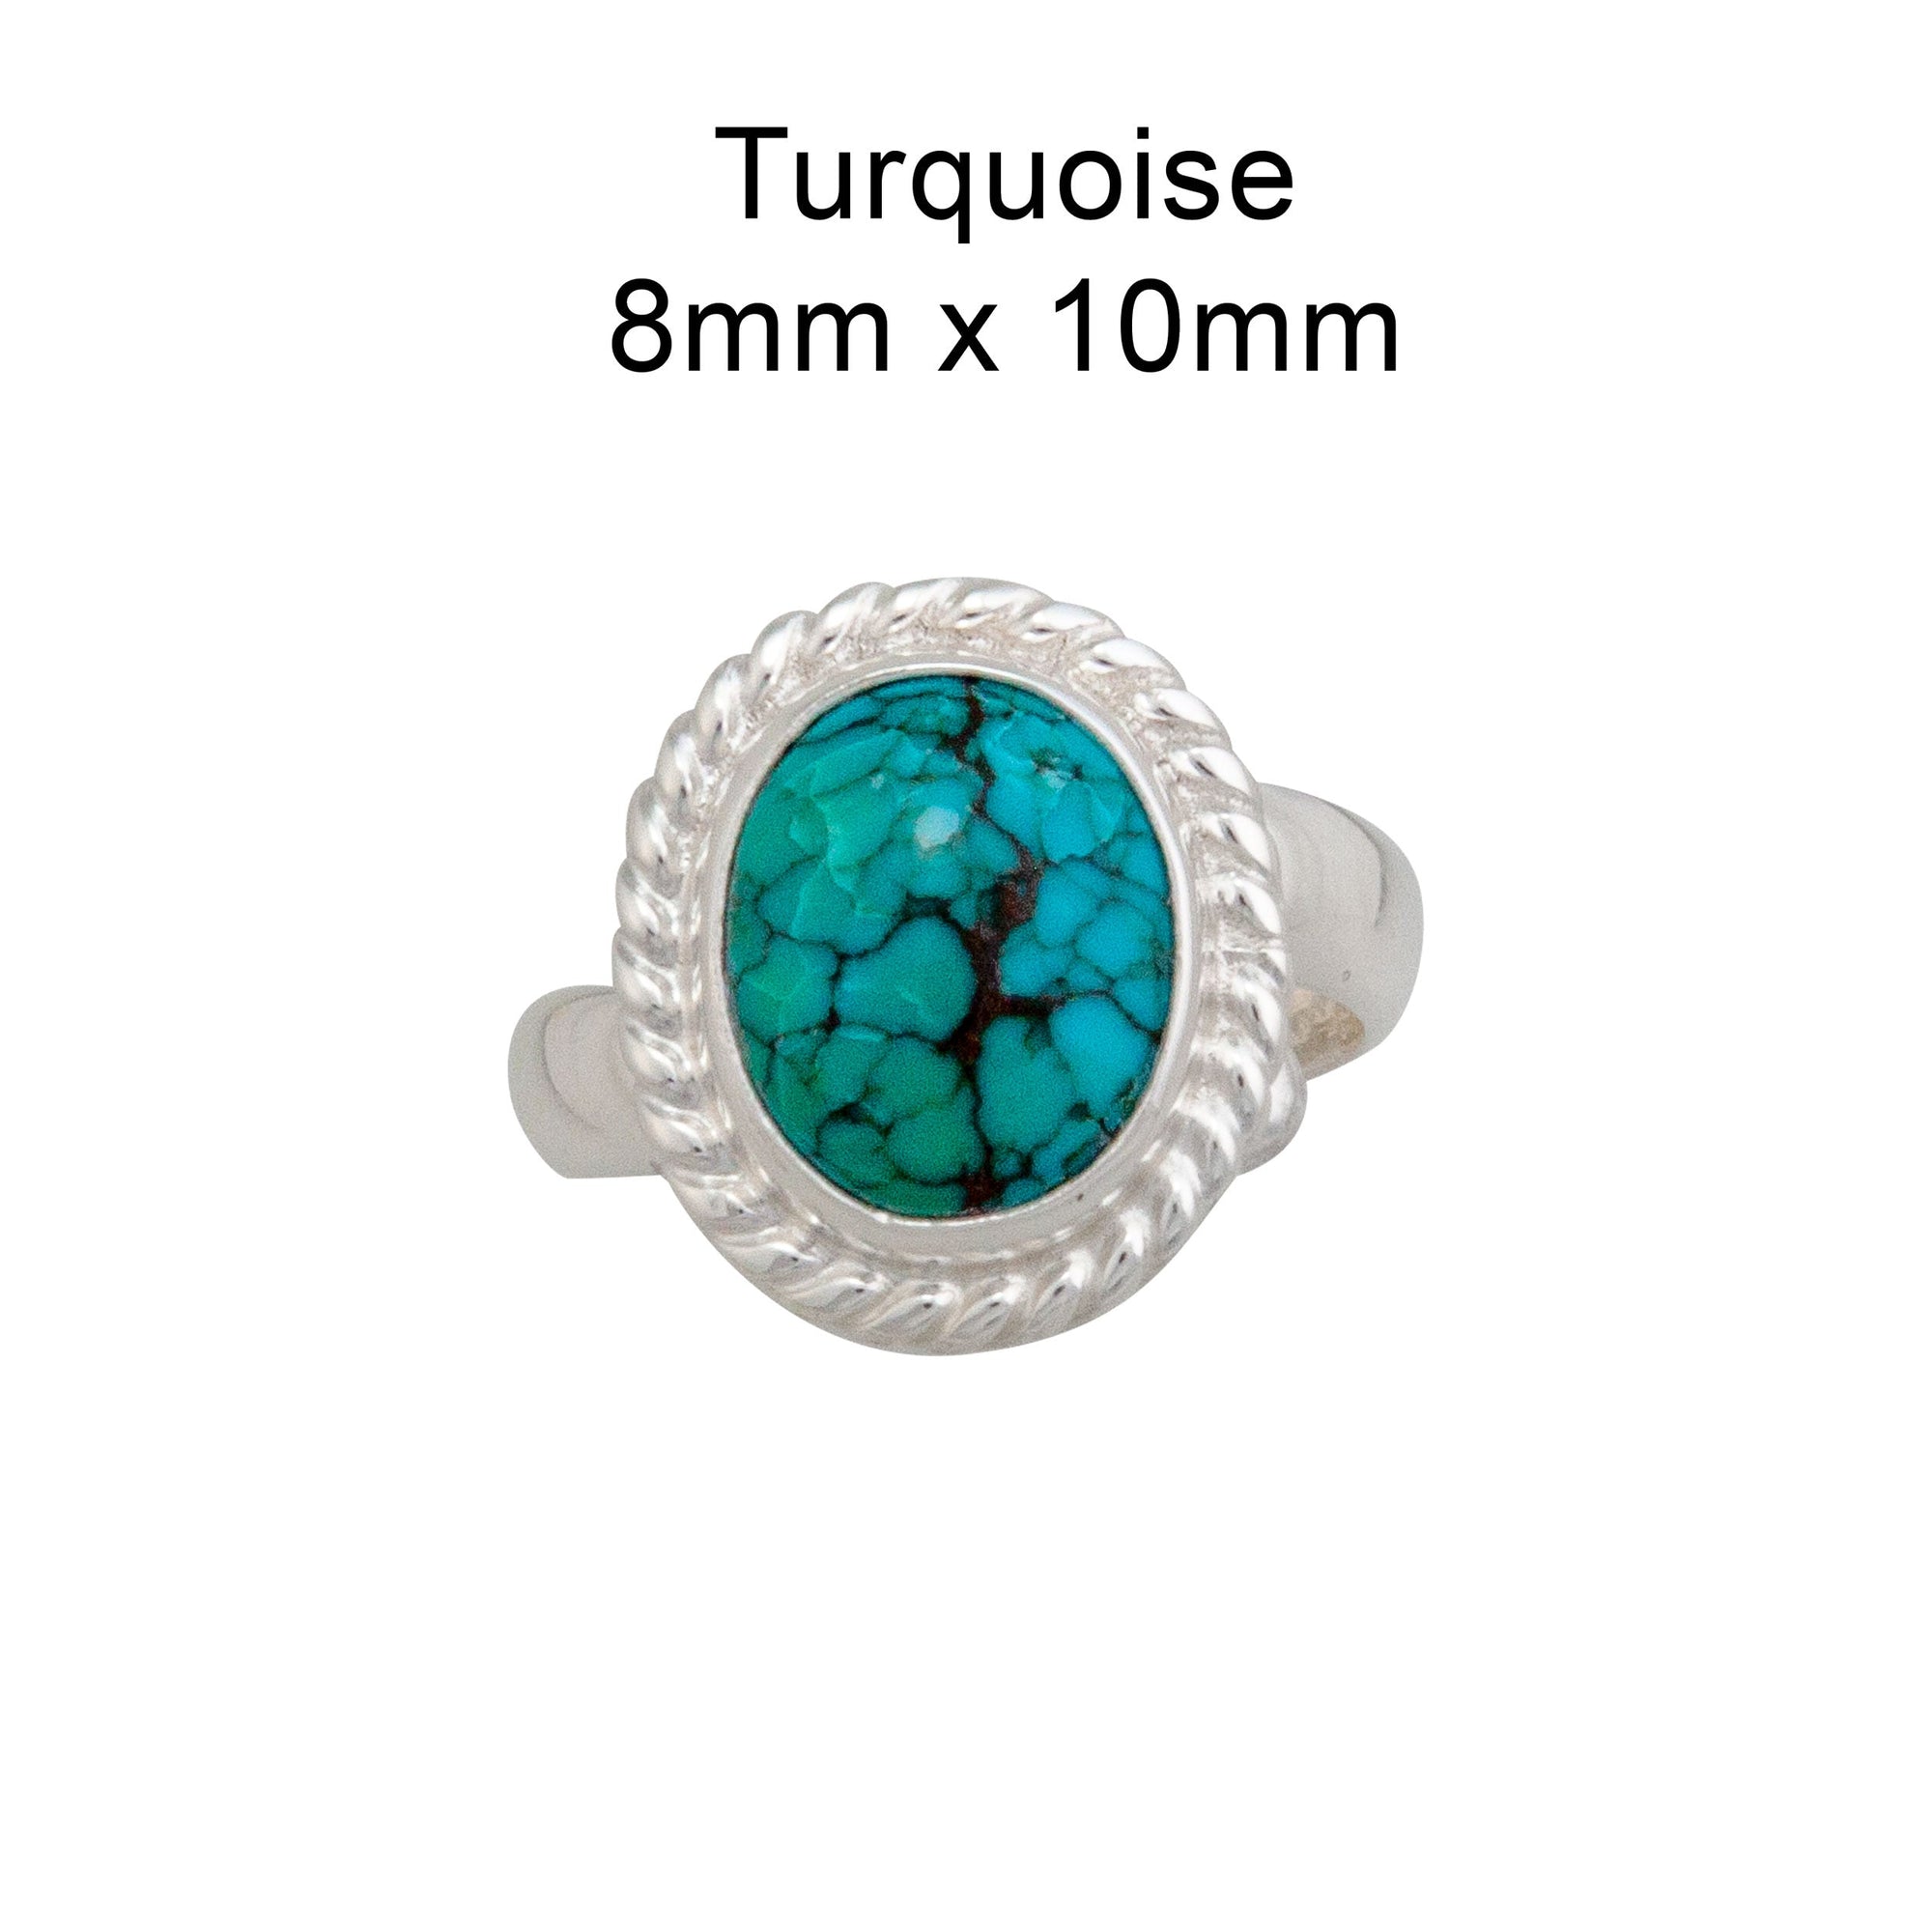 Sterling Silver Turquoise Rope Adjustable Ring | Charles Albert Jewelry